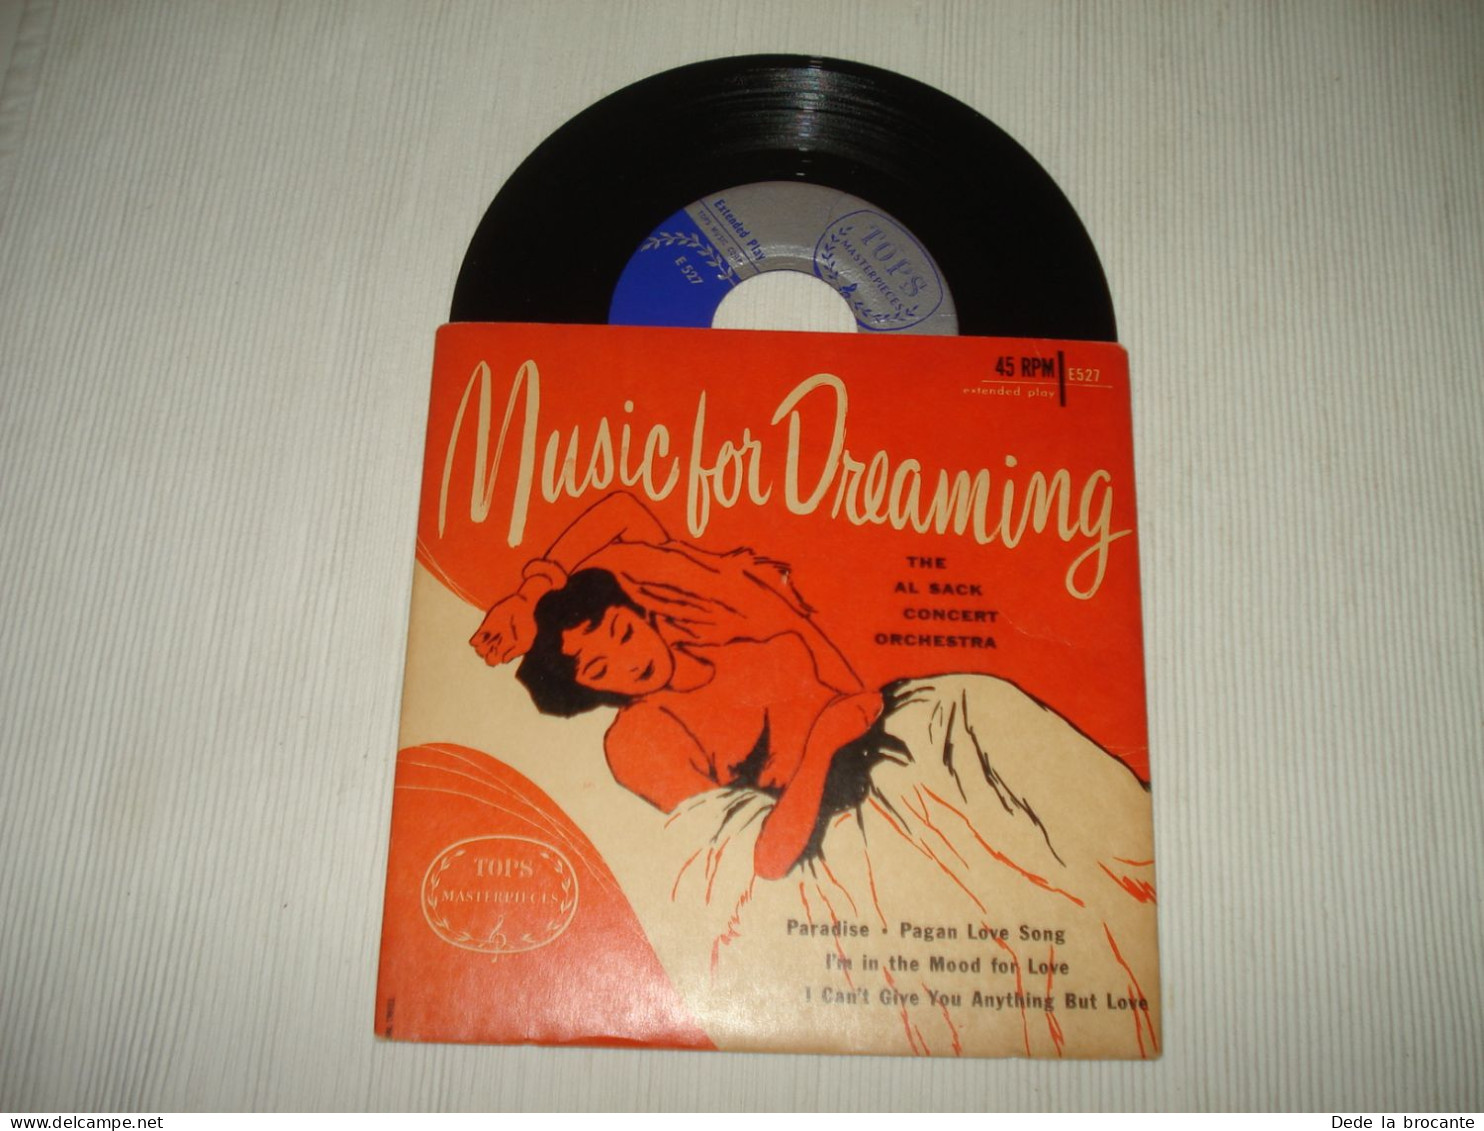 B13 / Al Sack His Concert Orch.  Music For Dreaming - EP – E 527 - US 1957 NM/NM - Formati Speciali